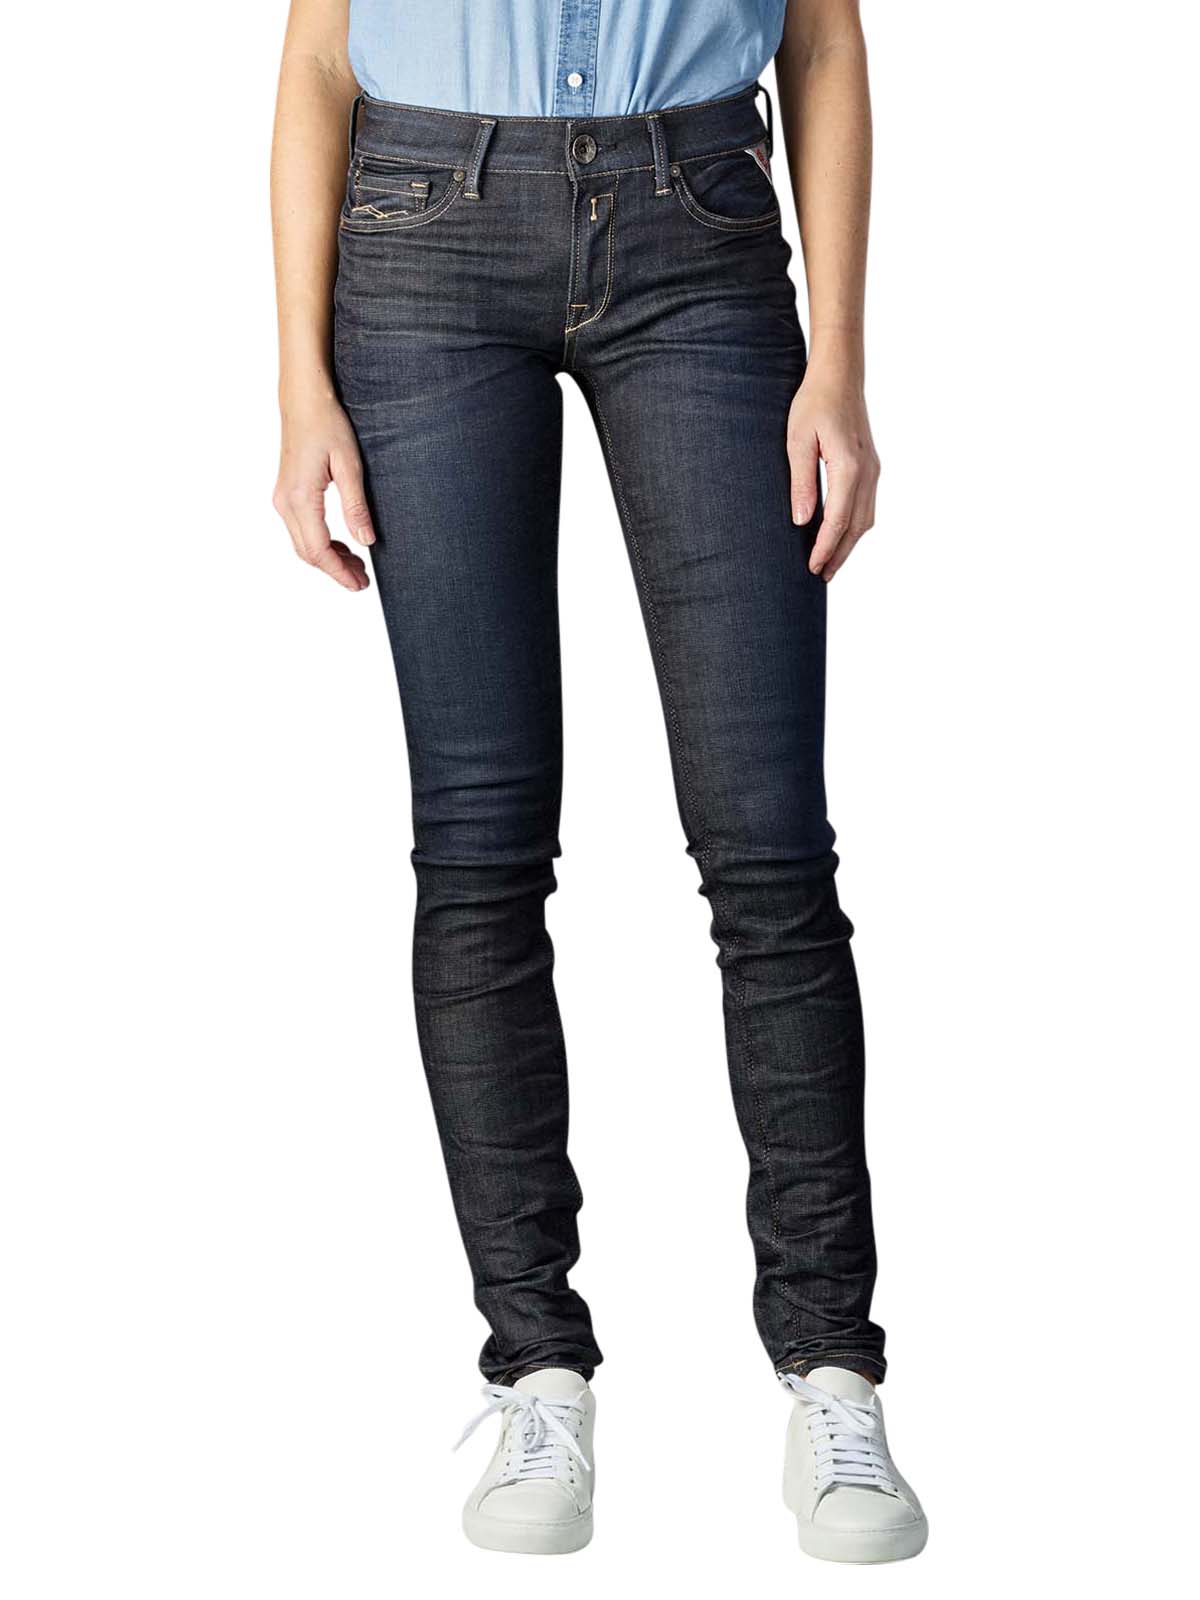 Replay Luz Jeans Skinny Hyperflex Stretch washed blue Replay Women's Jeans | Shipping on BEBASIC.CH - GOOD